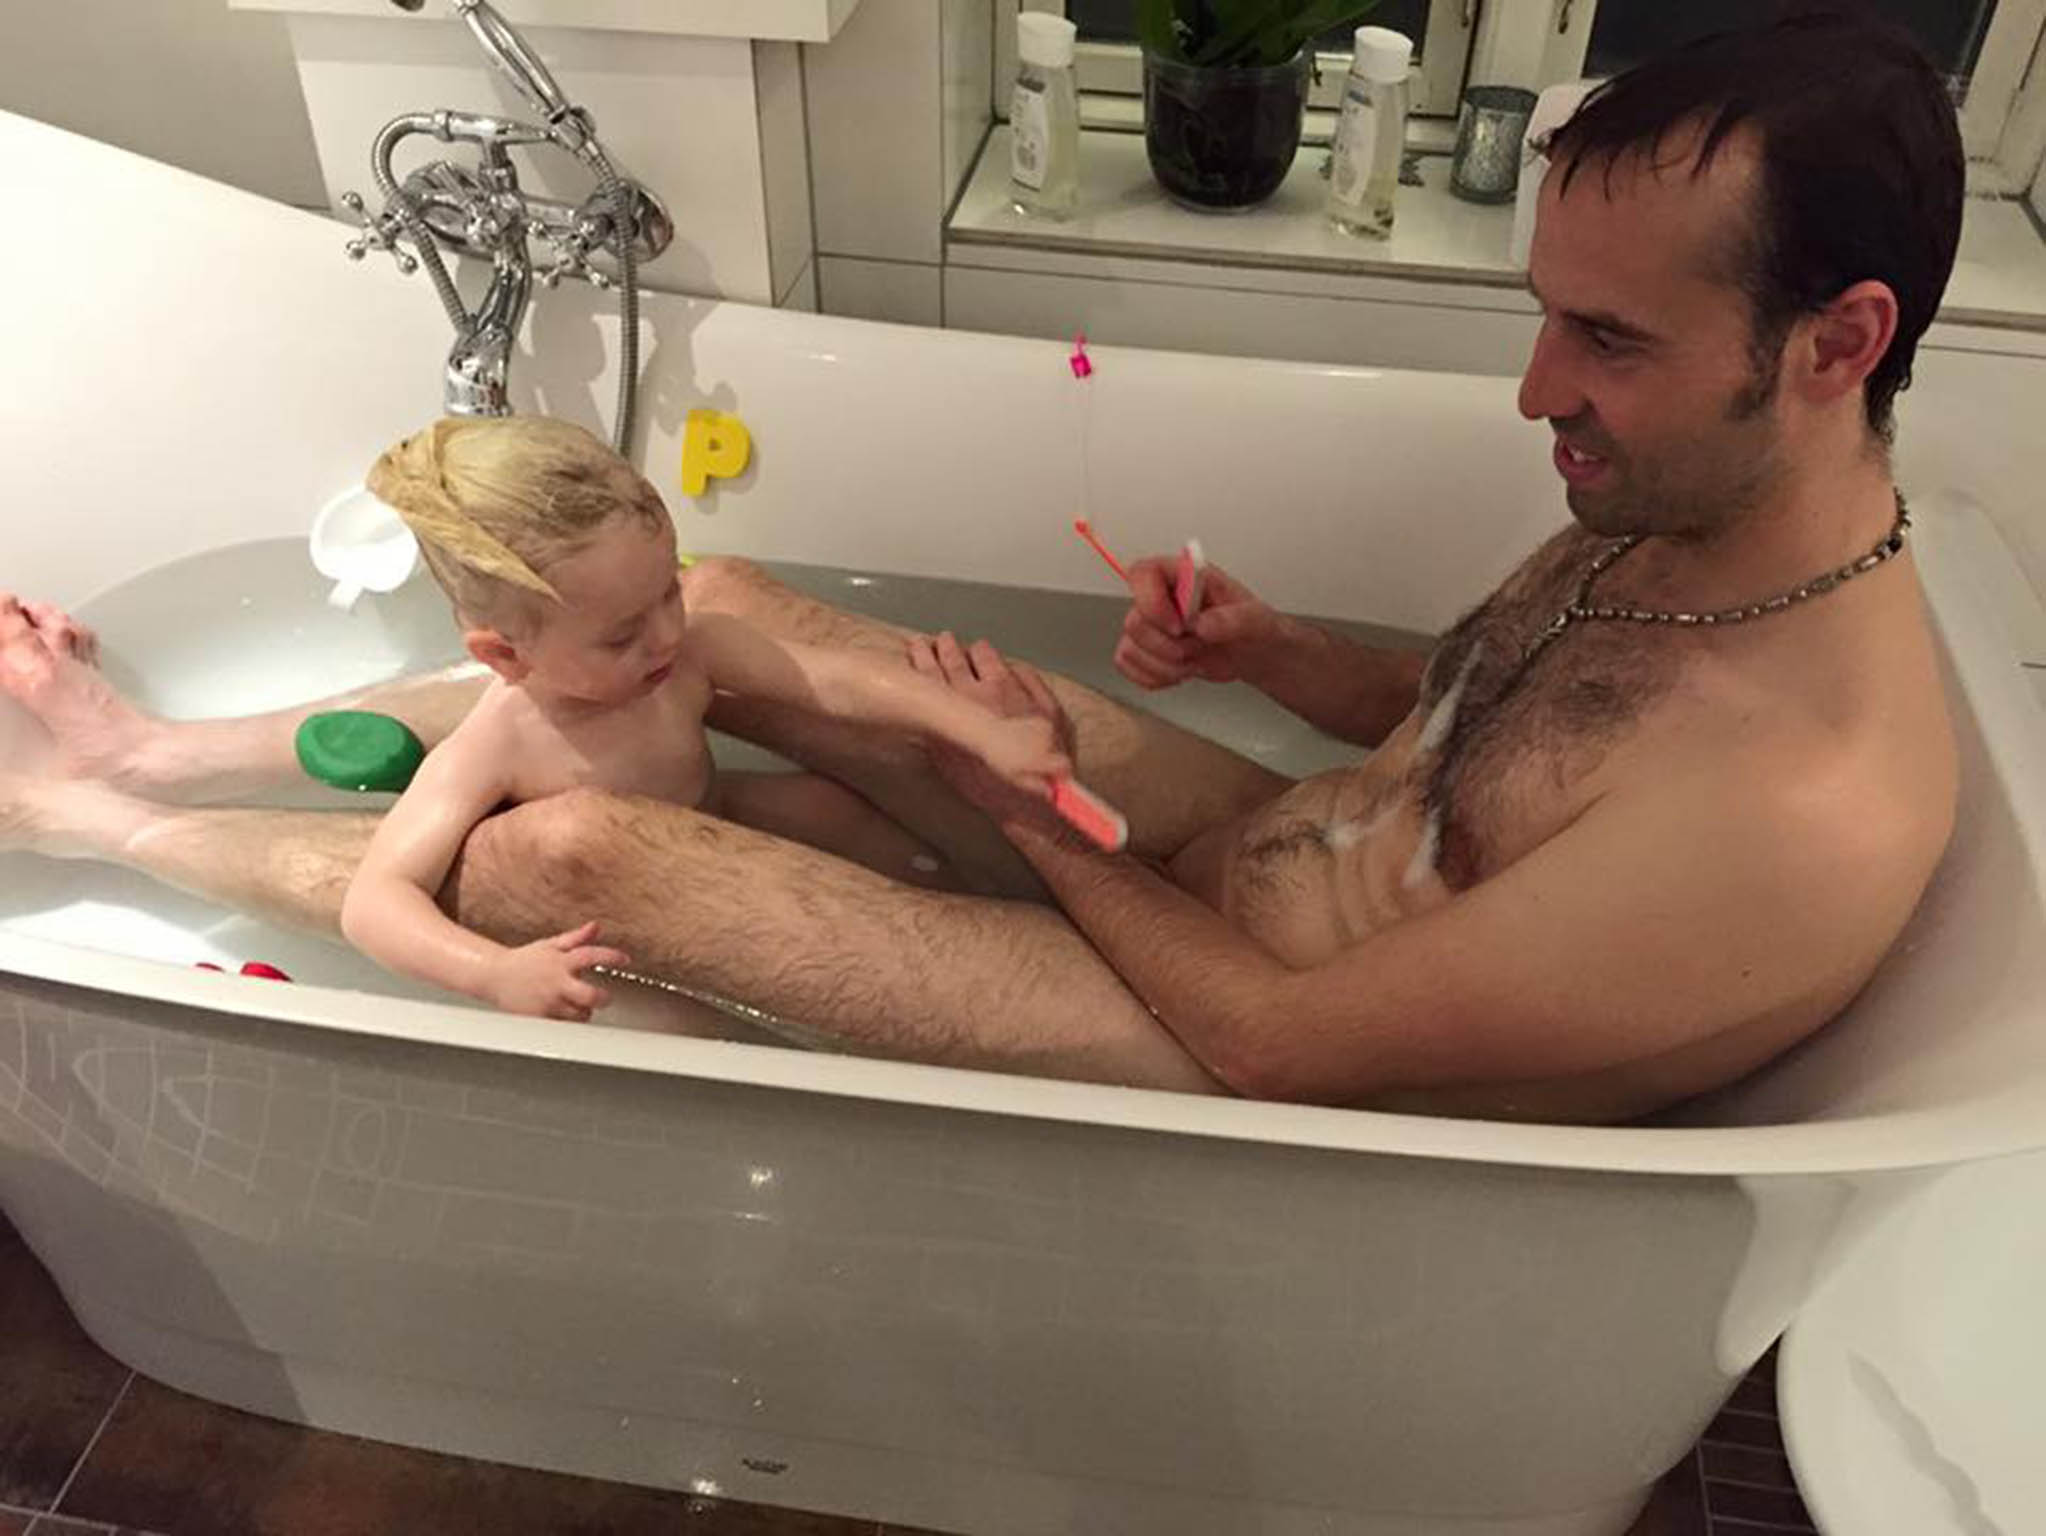 Torben Chris Danish comedian posts photo of himself taking a bath with his two-year-old daughter in face of paedophilia claims The Independent The Independent picture